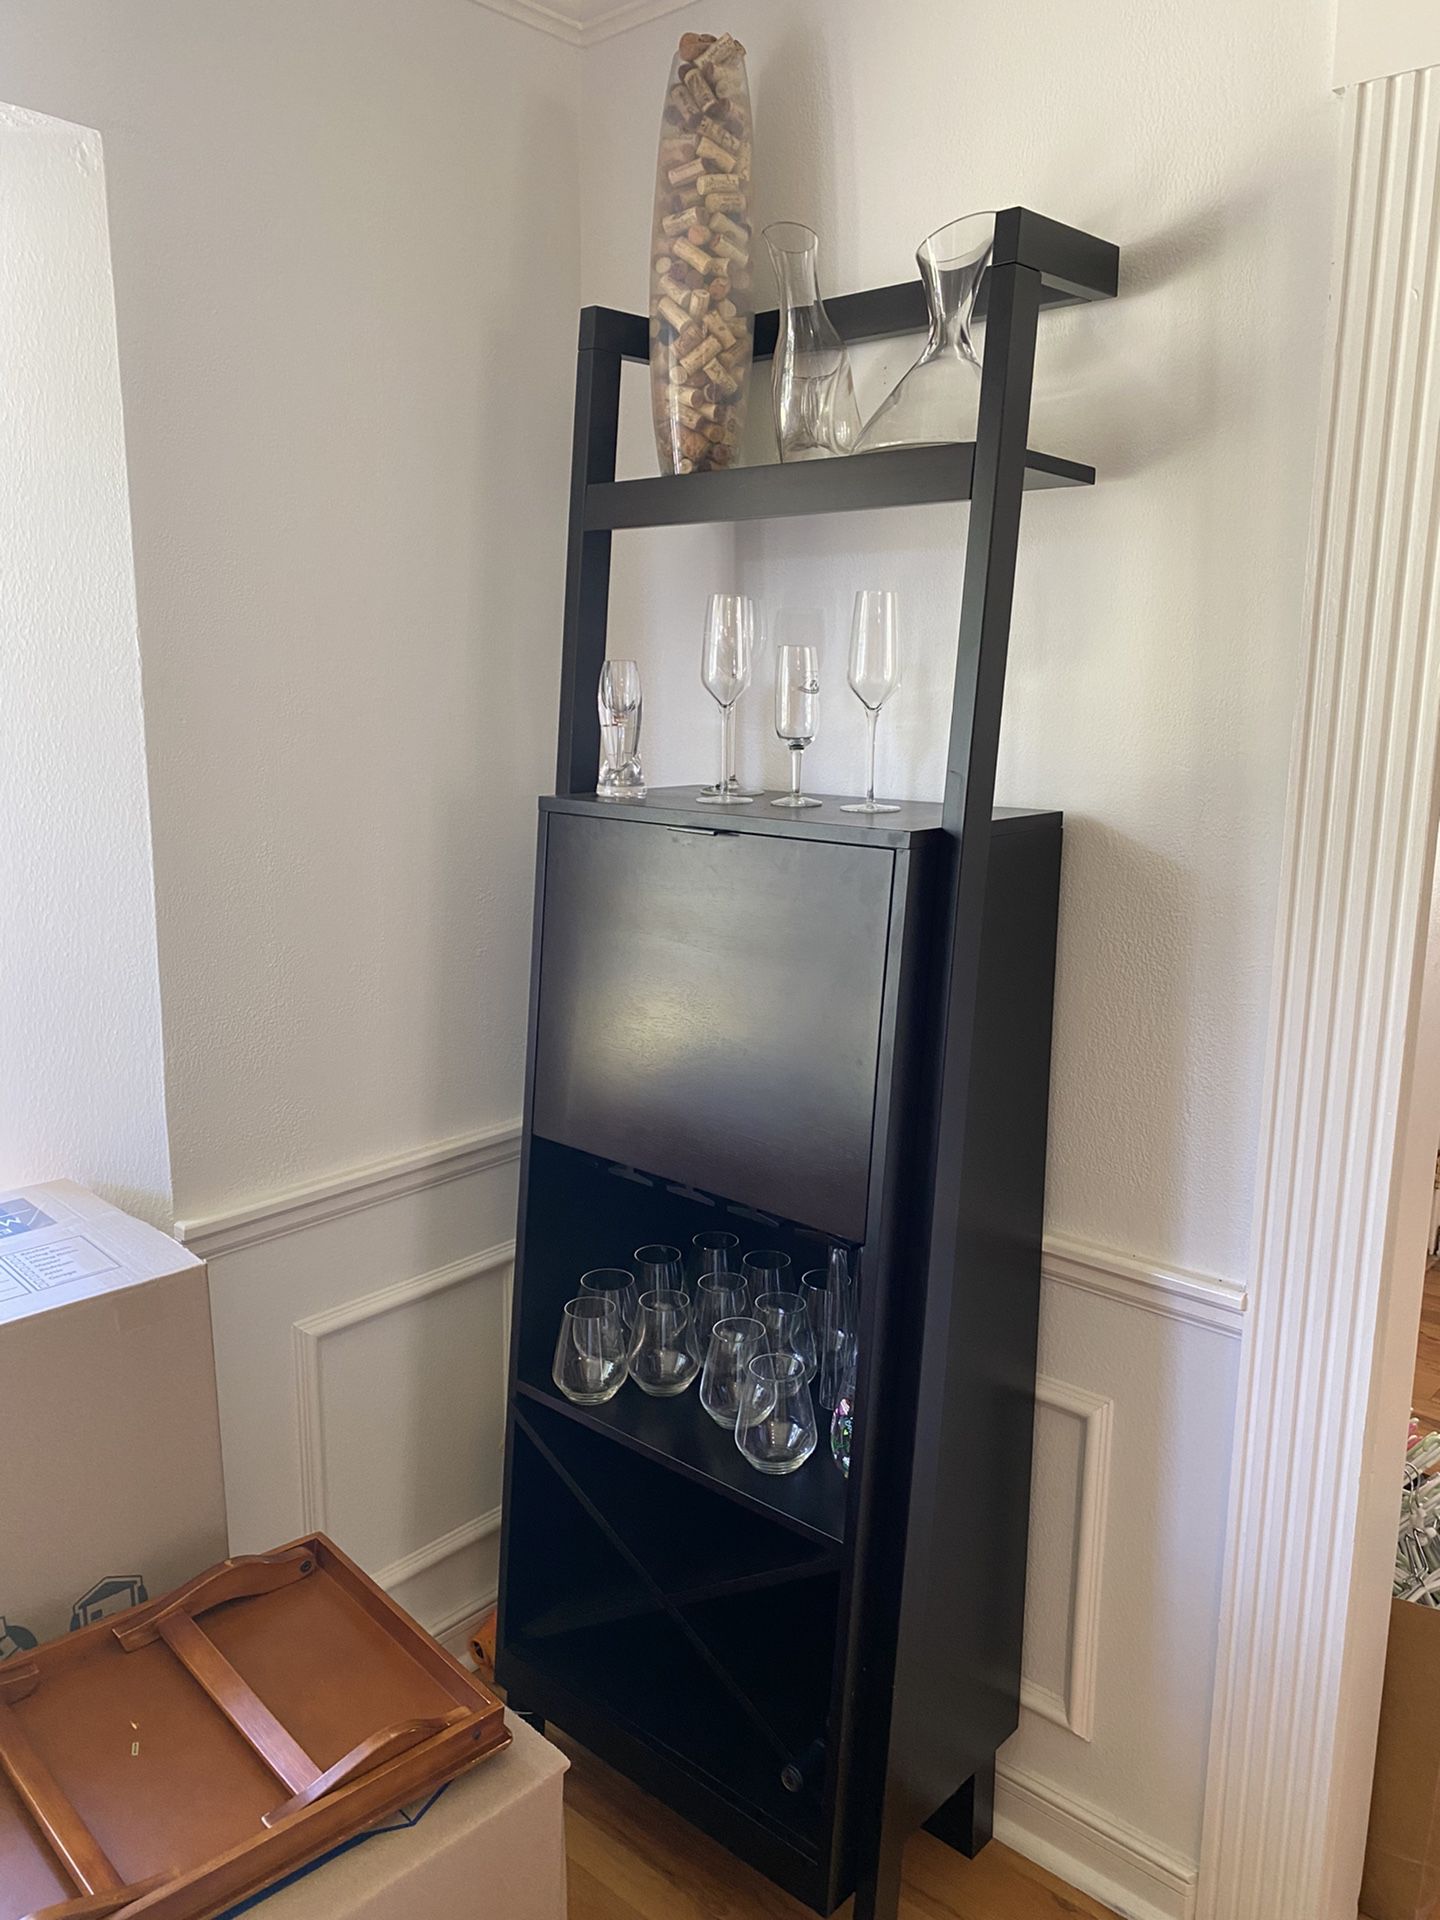 Crate And Barrel wine and beverage Stand